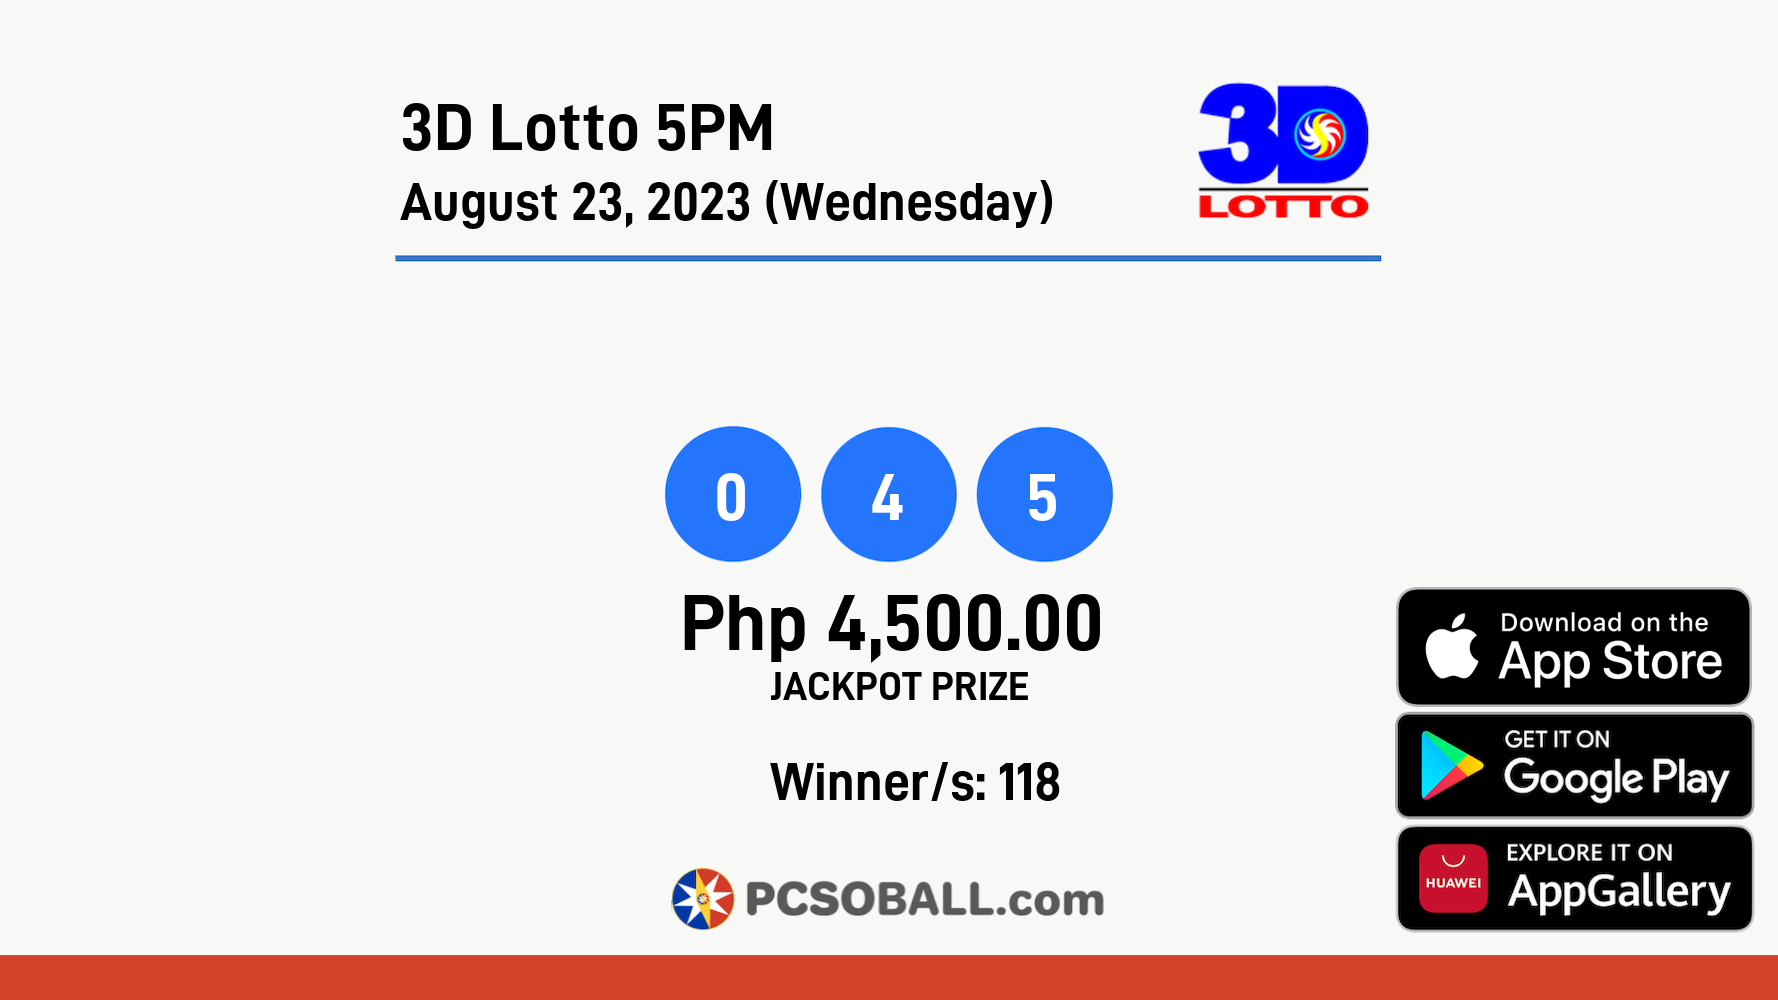 3D Lotto 5PM August 23, 2023 (Wednesday) Result